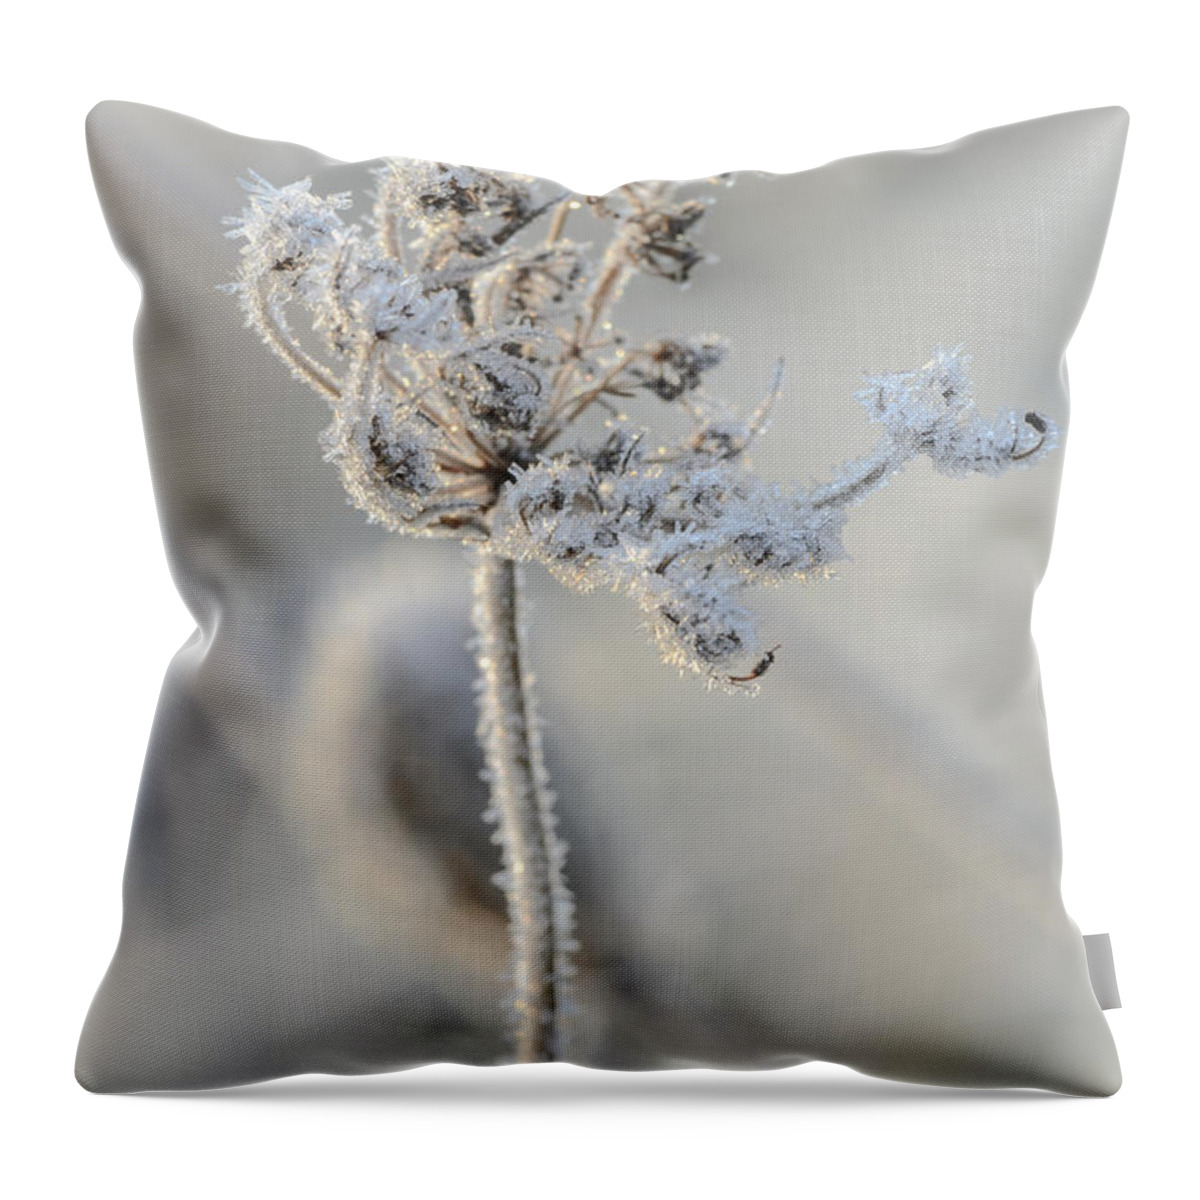 Queen Anne's Lace Throw Pillow featuring the photograph Queen Anne's Lace Covered in Frost by Tamara Becker